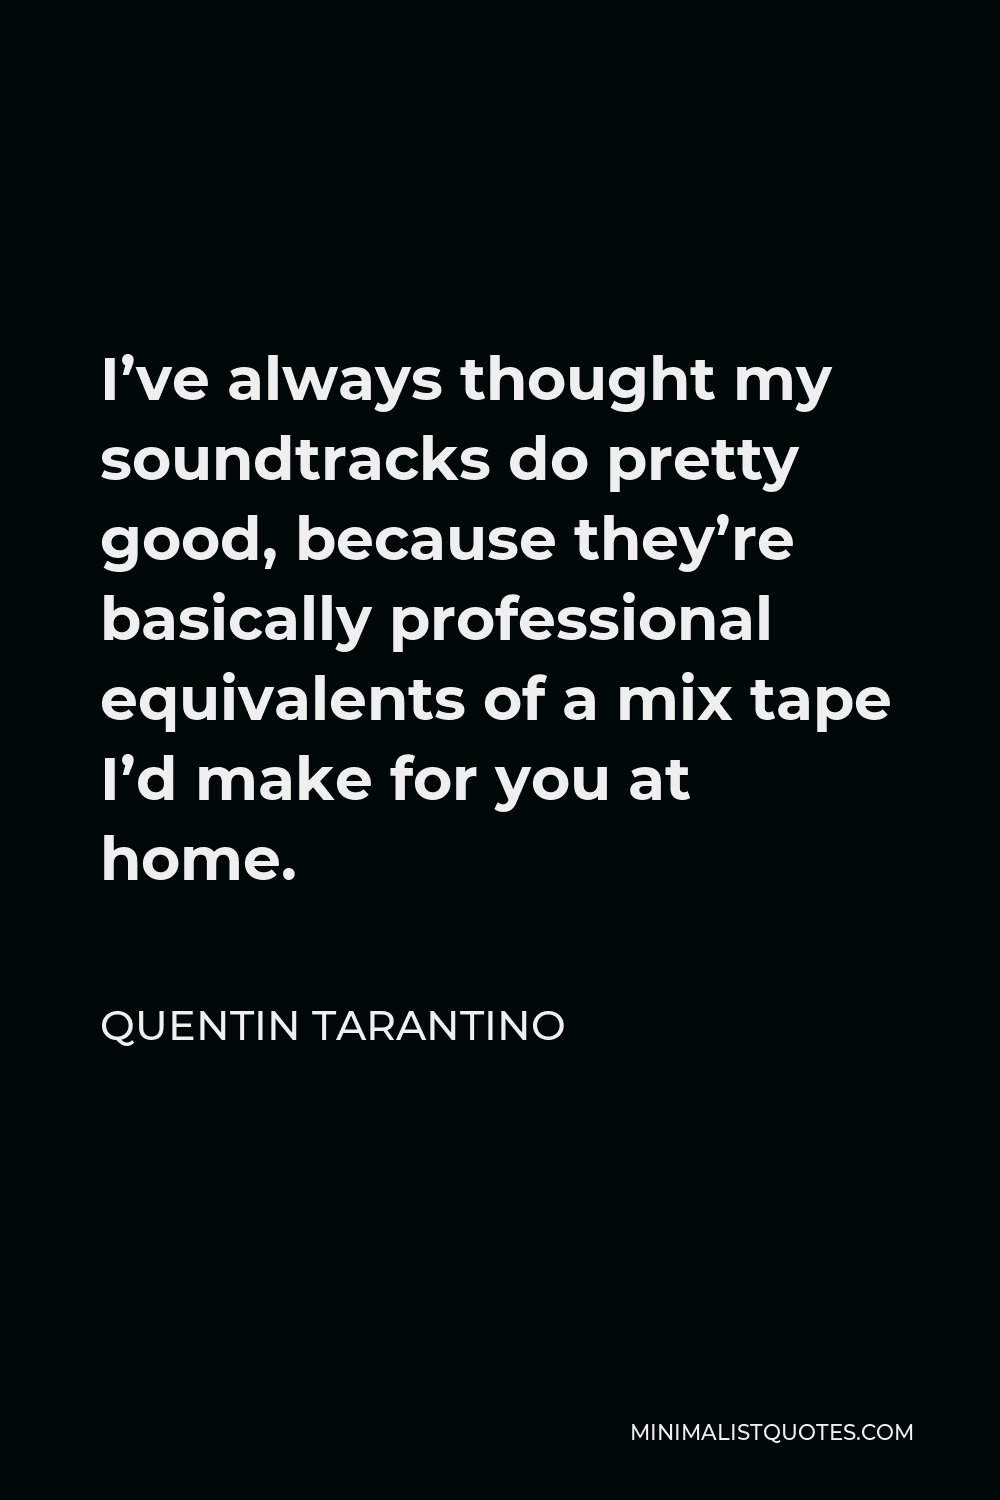 Quentin Tarantino Quote - I’ve always thought my soundtracks do pretty good, because they’re basically professional equivalents of a mix tape I’d make for you at home.